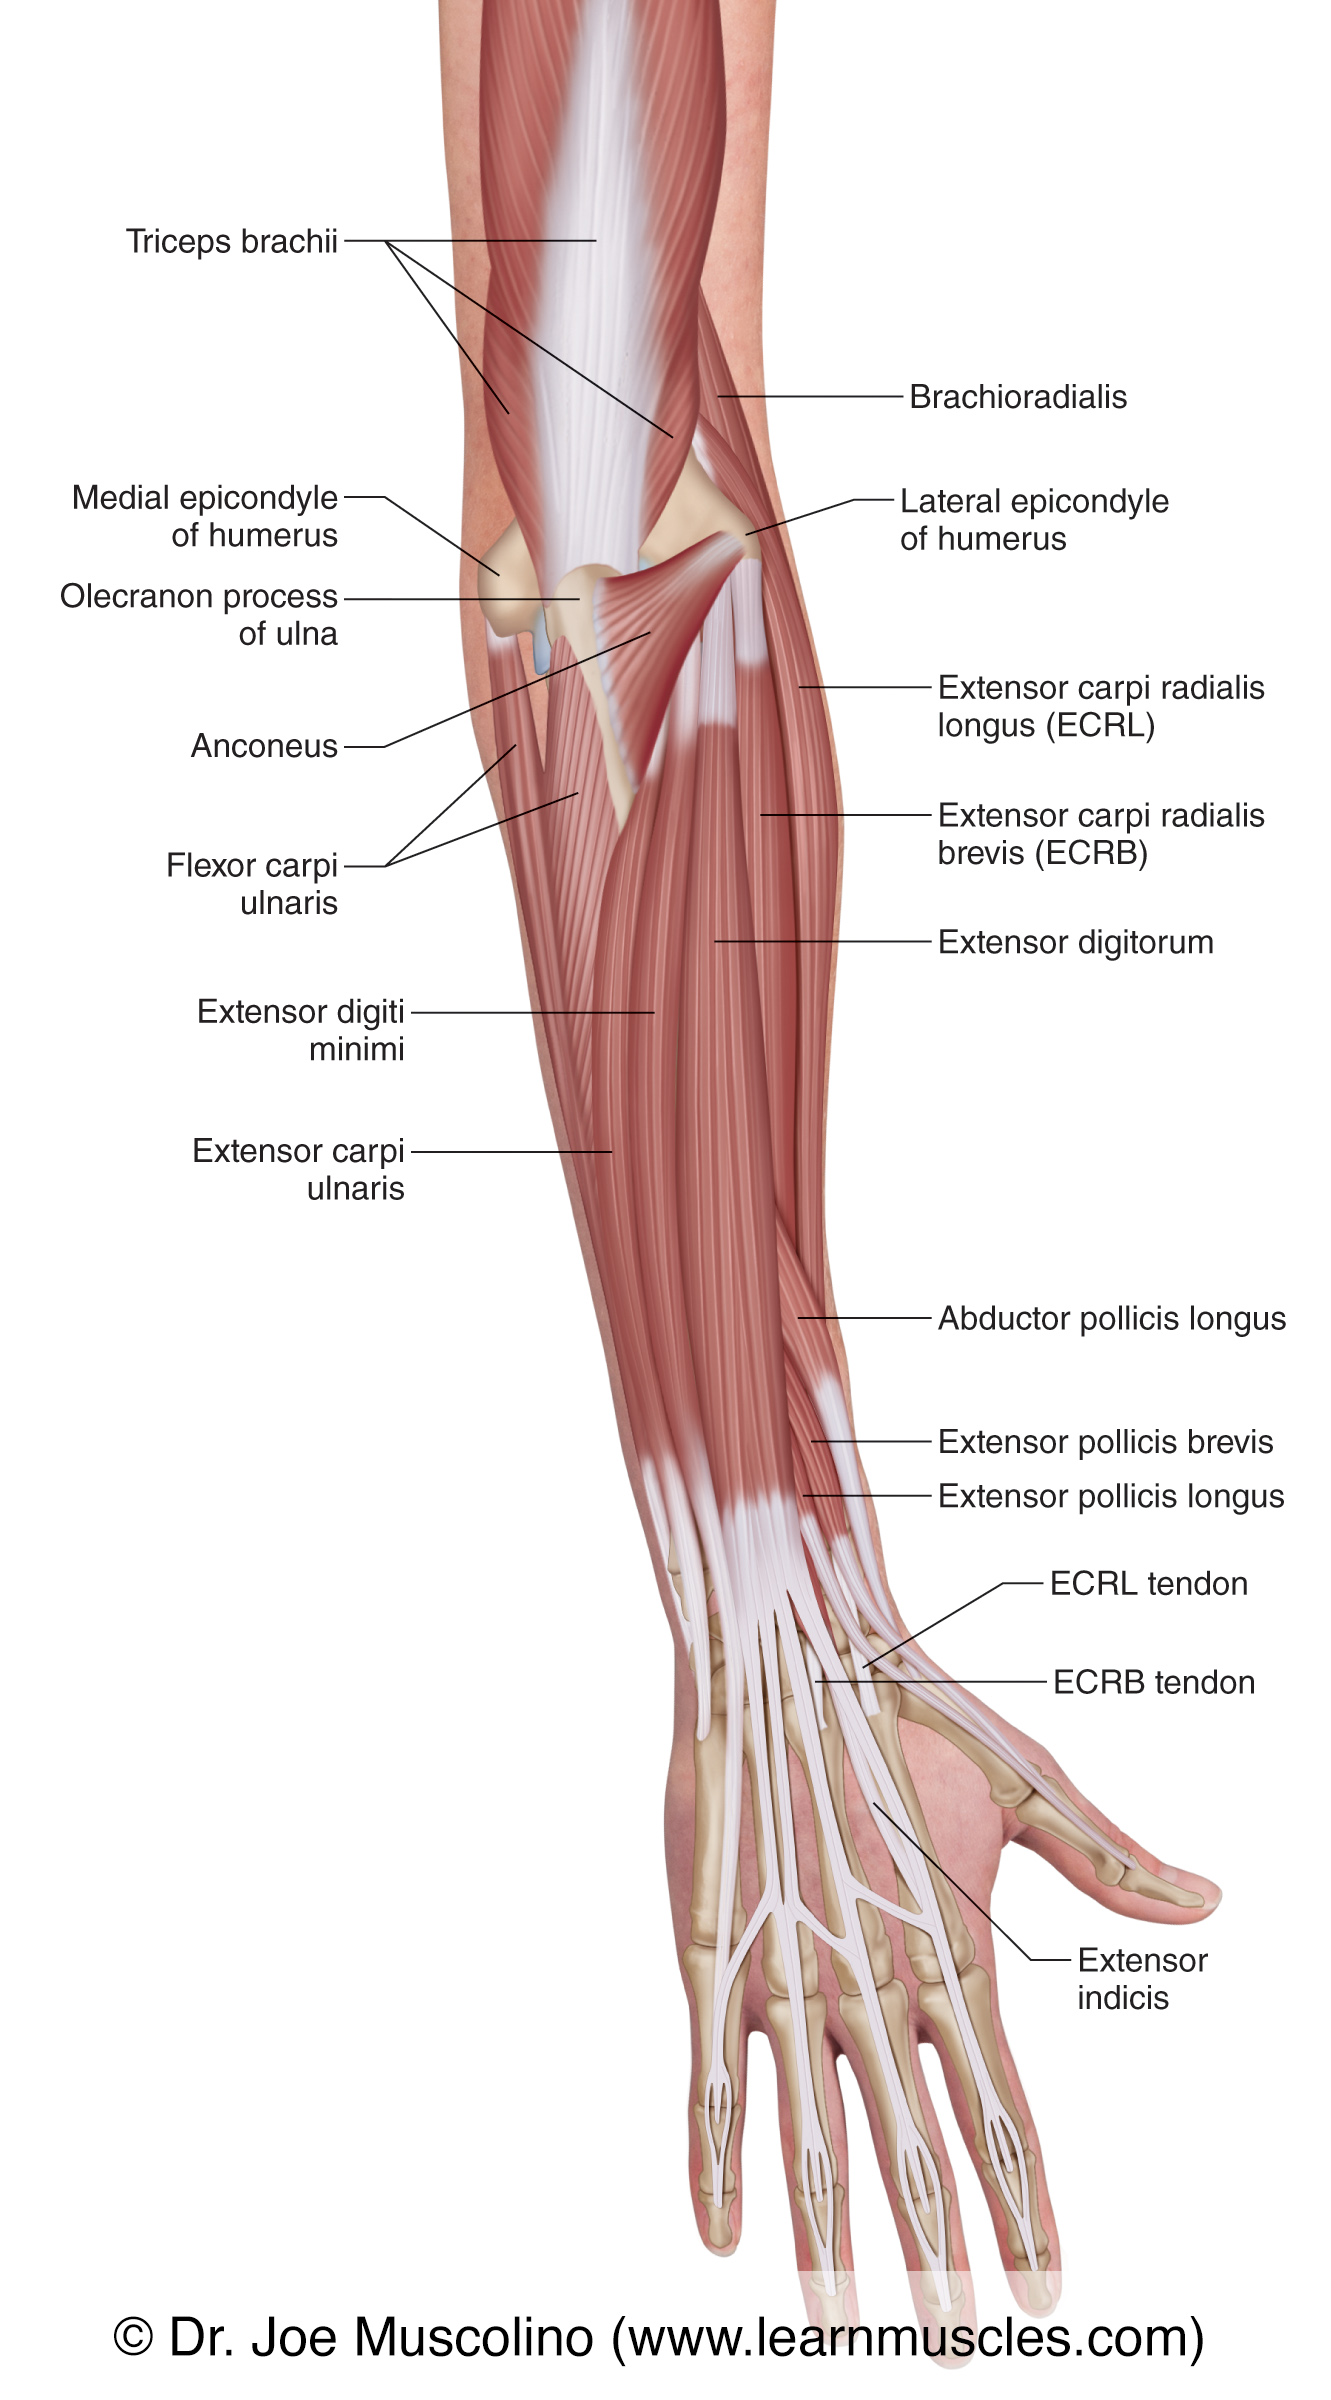 Muscles Of The Posterior Forearm Superficial View Learn Muscles